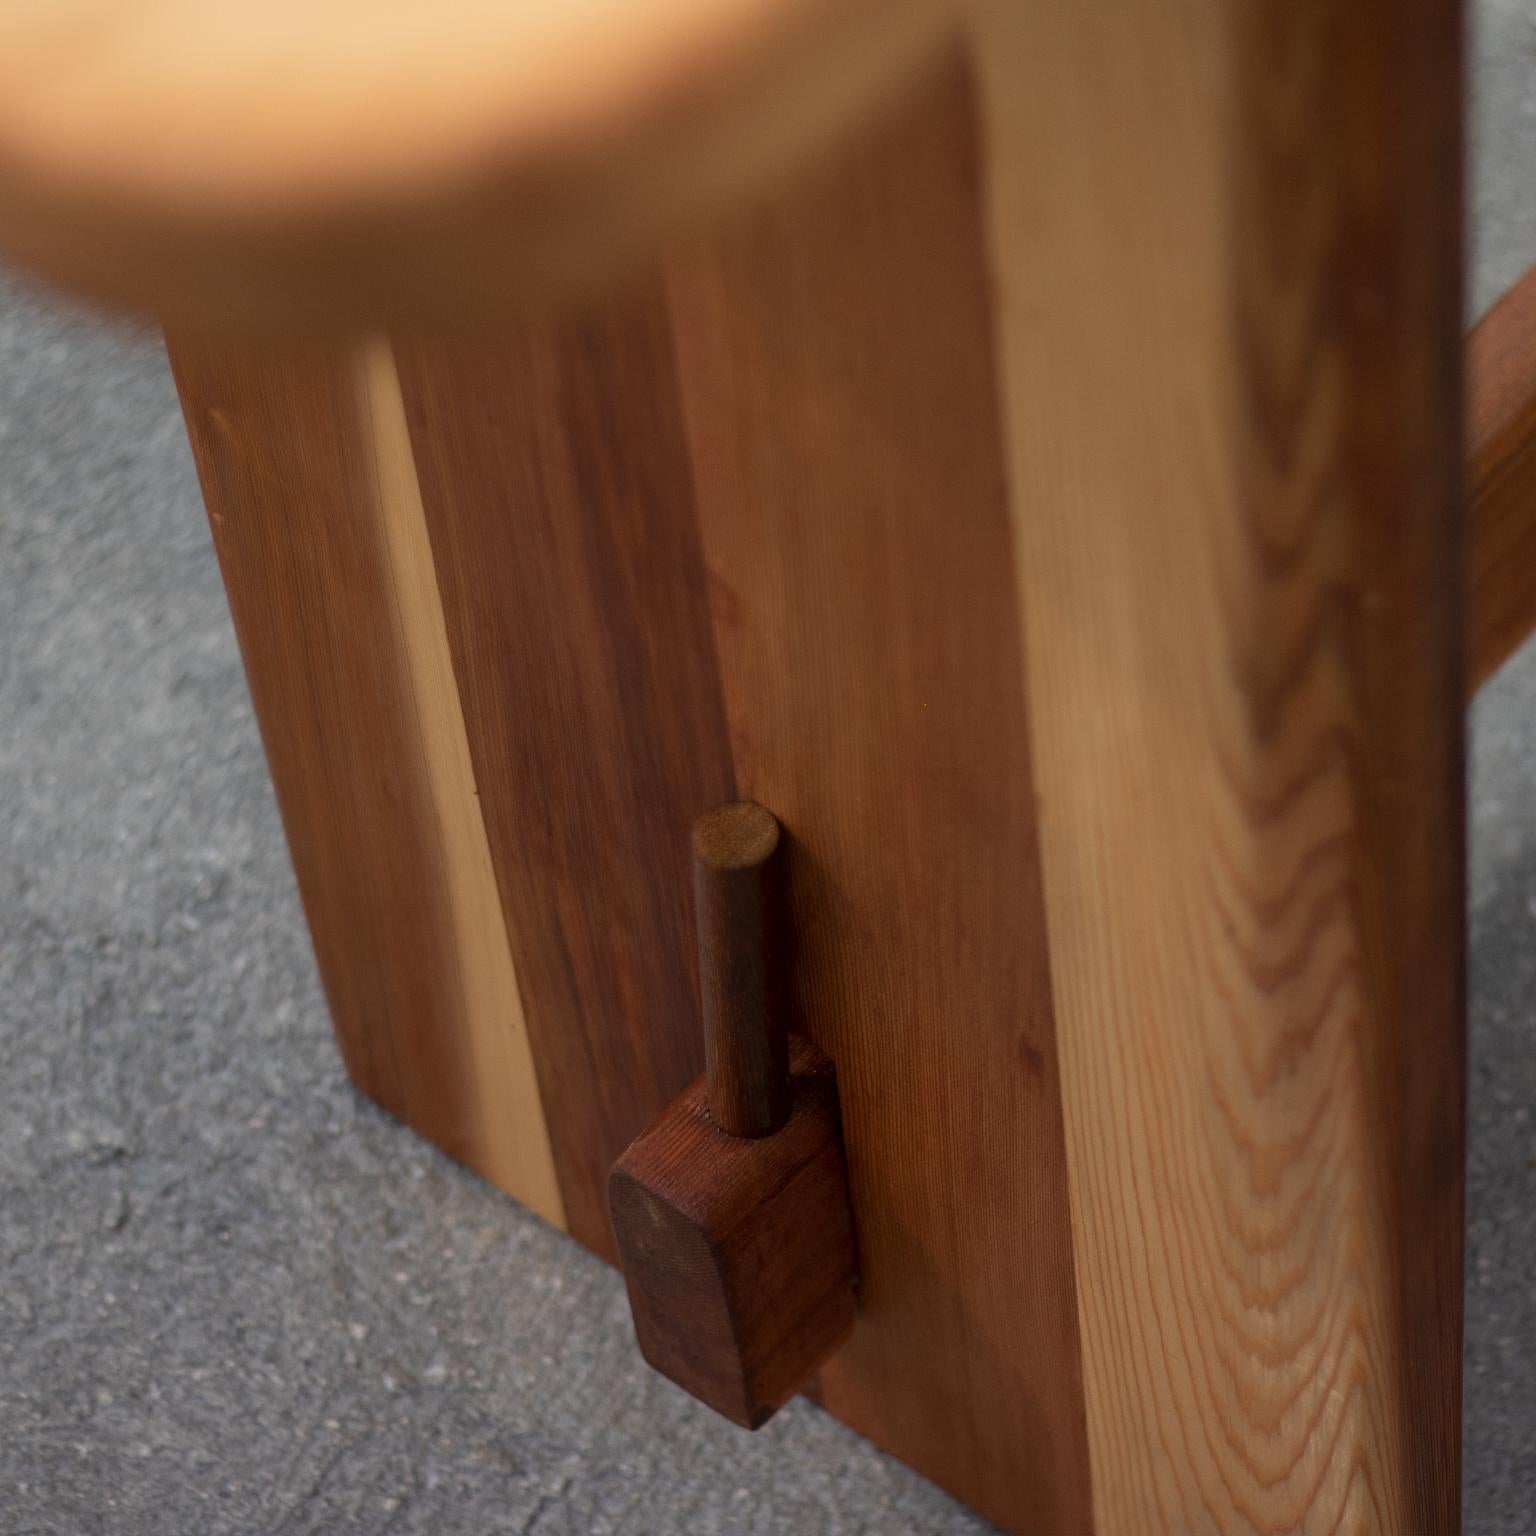 This table features solid cedar construction with Japanese style joinery. 
The edges are bevelled and the corners are rounded. 
The base is connected to the top using dowels.
Finished in linseed oil and beeswax.

Customizable.
Bench and